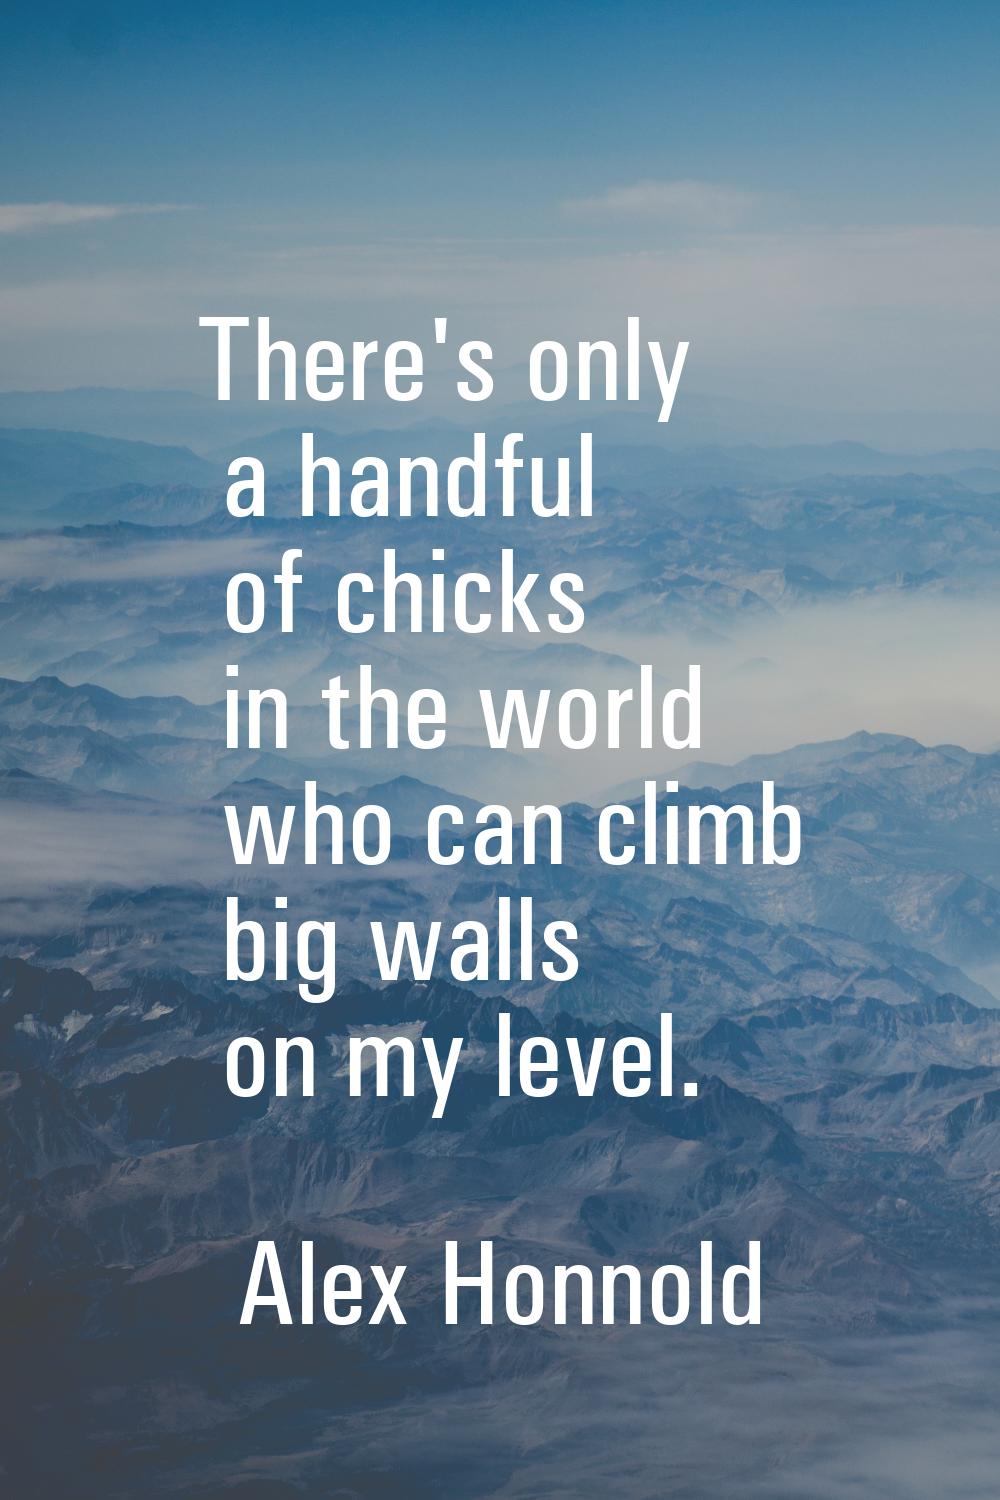 There's only a handful of chicks in the world who can climb big walls on my level.